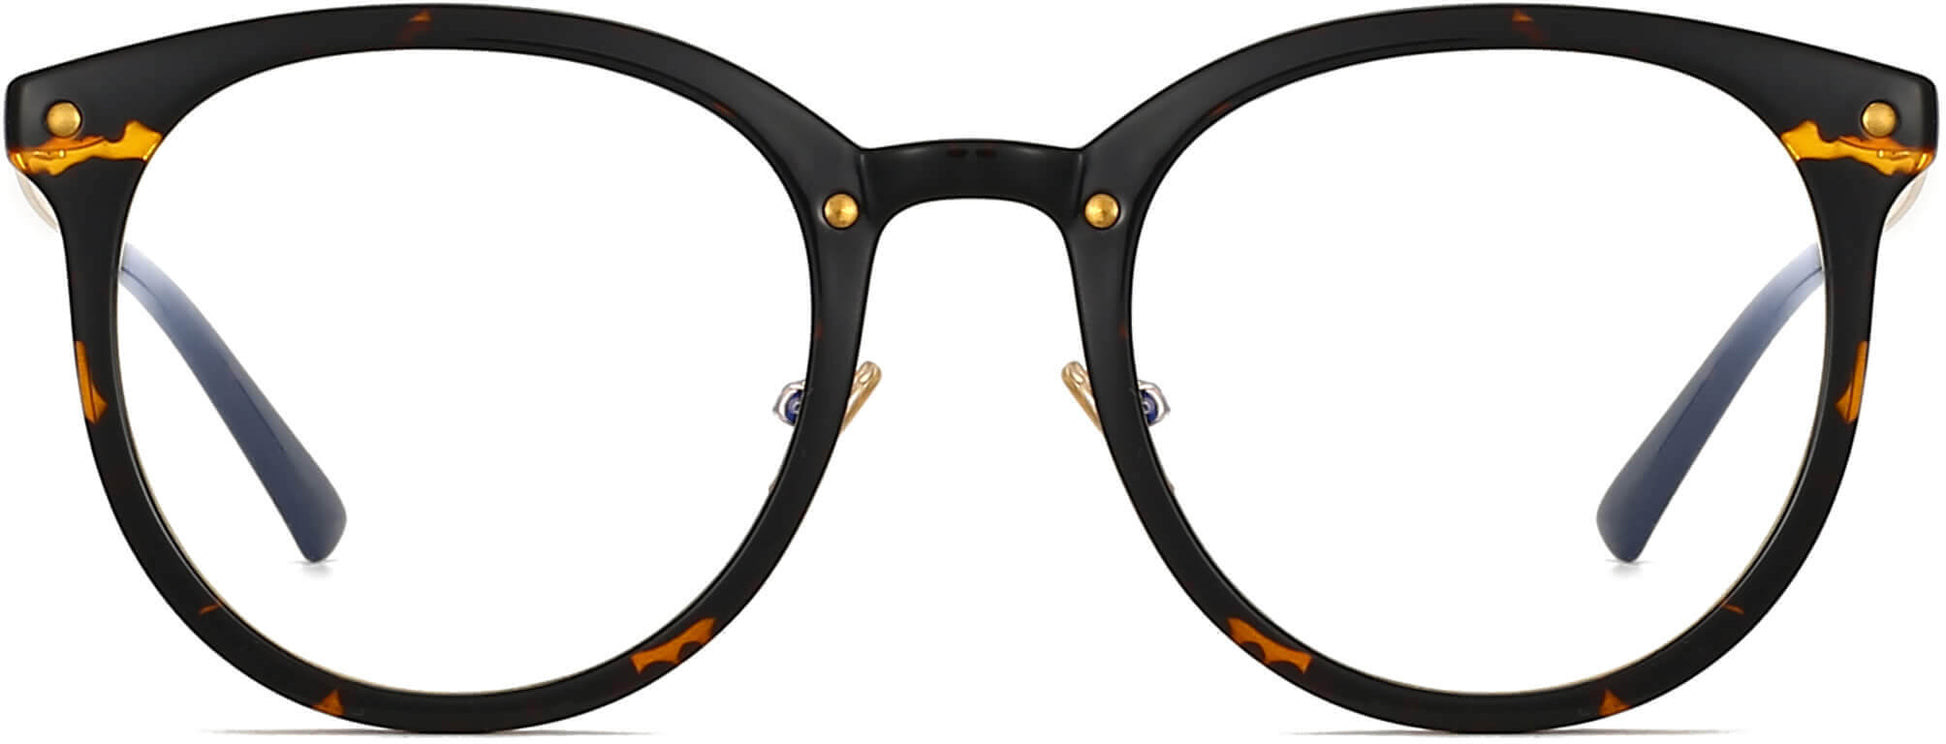 Miller Round Tortoise Eyeglasses from ANRRI, front view